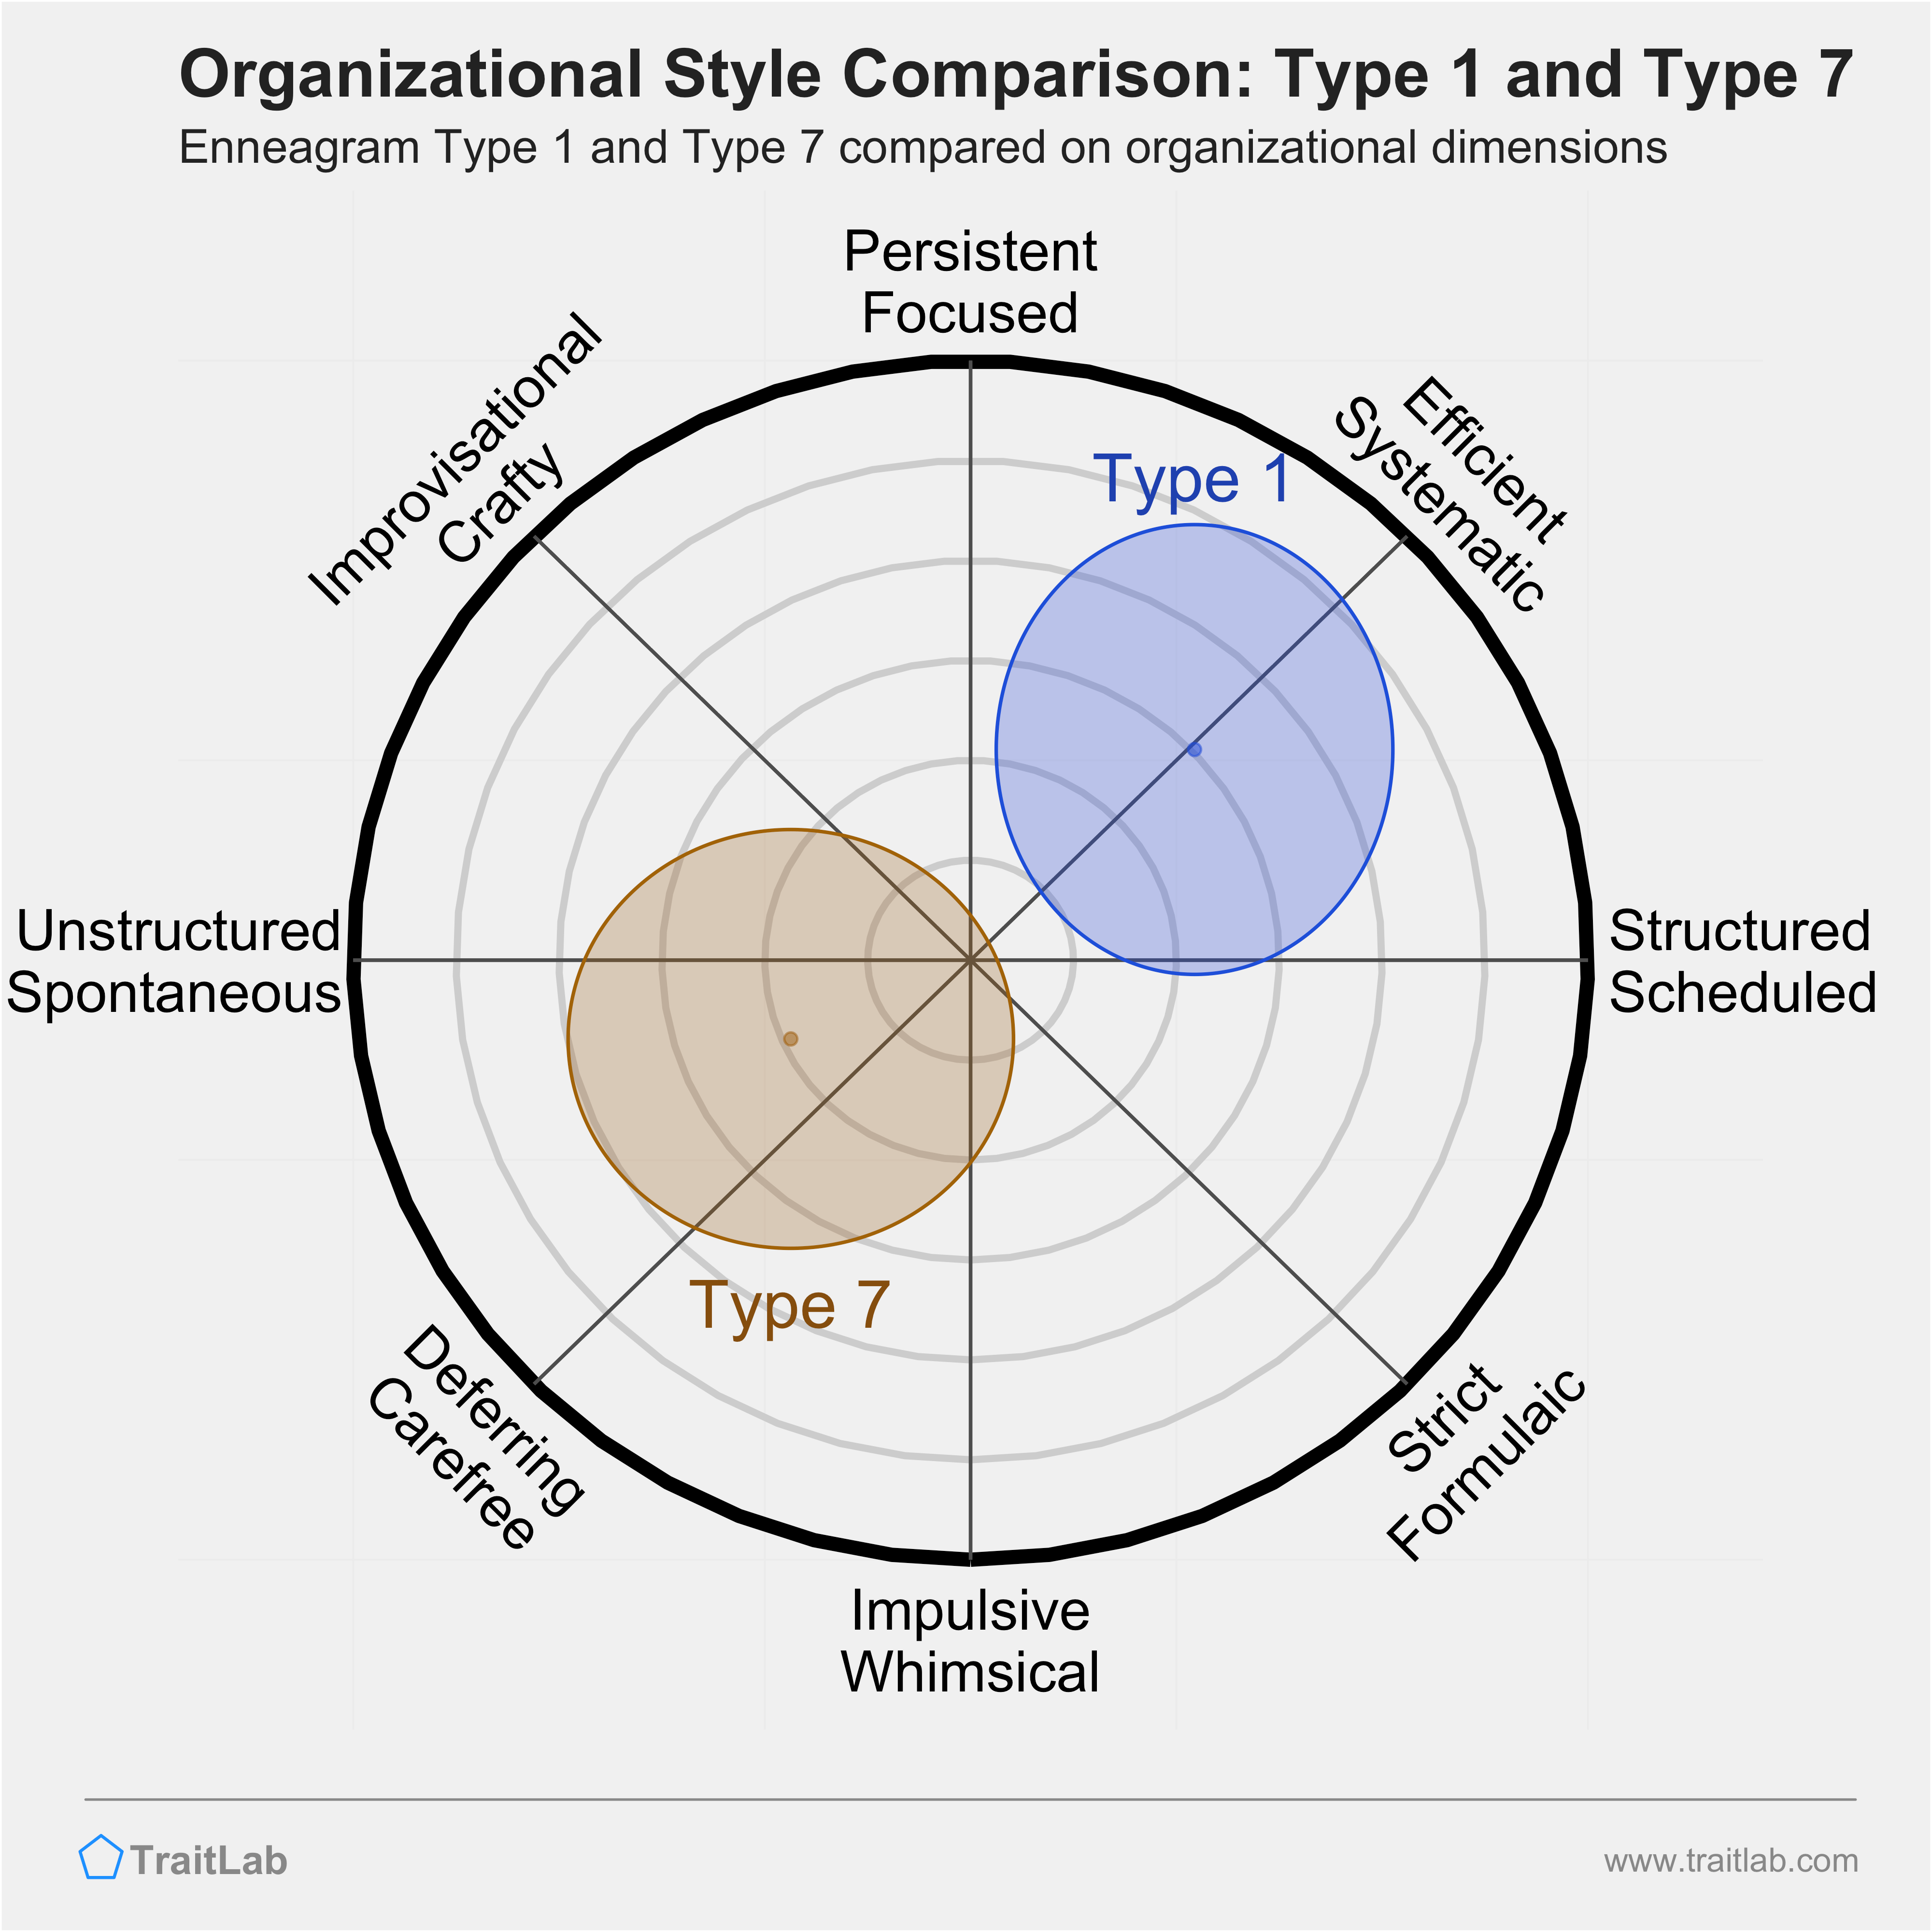 Type 1 and Type 7 comparison across organizational dimensions